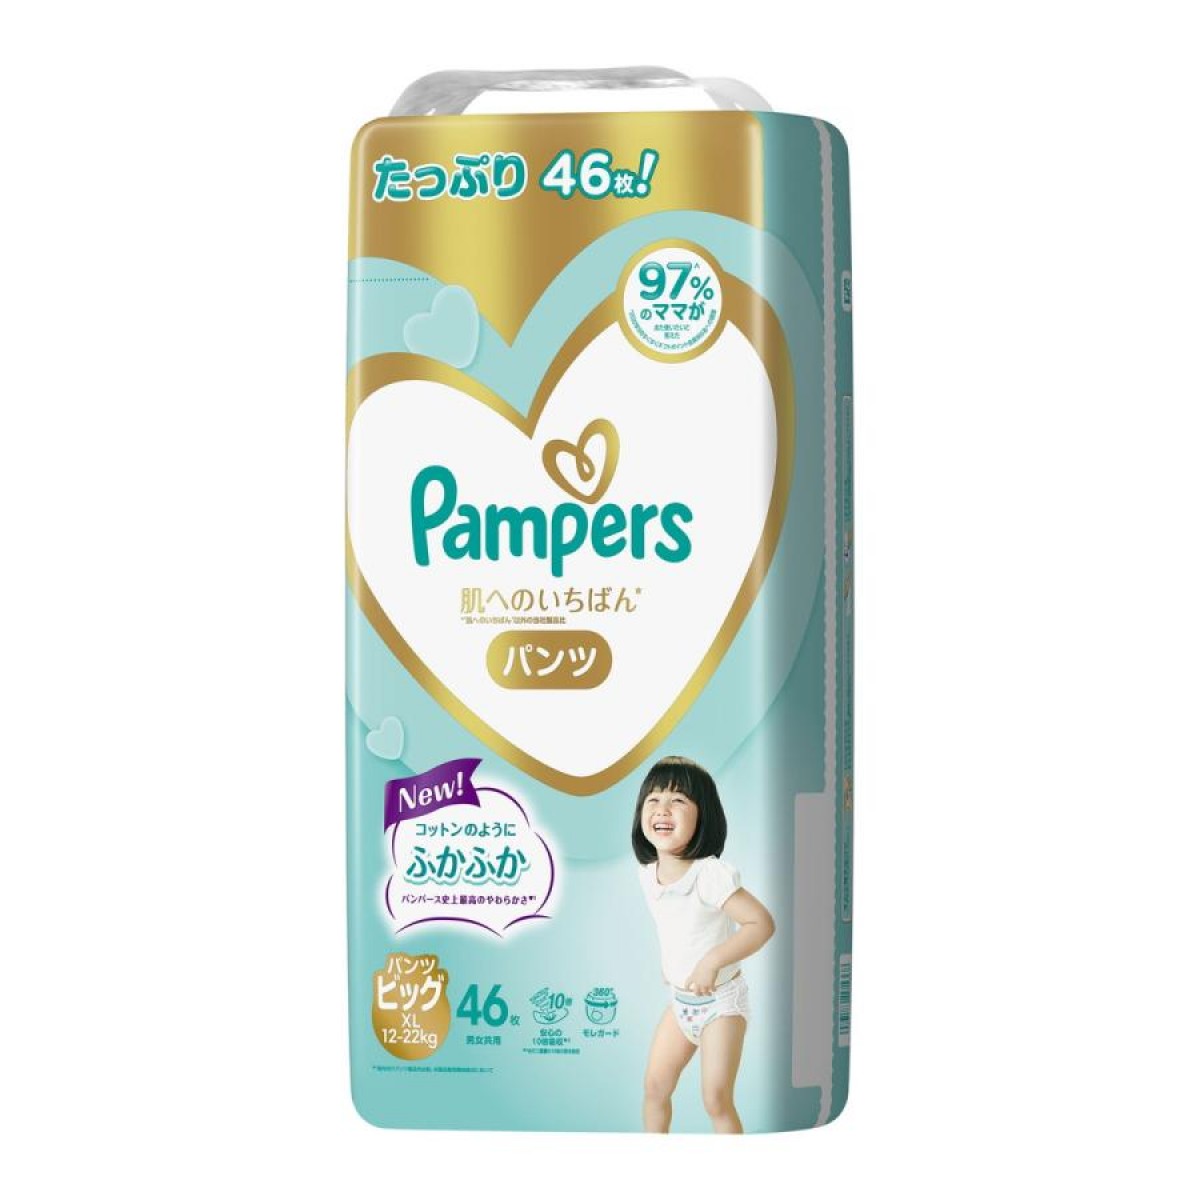 PositraRx: Your Local Online Pharmacy: PAMPERS PREMIUM CARE 36 PANTS XL